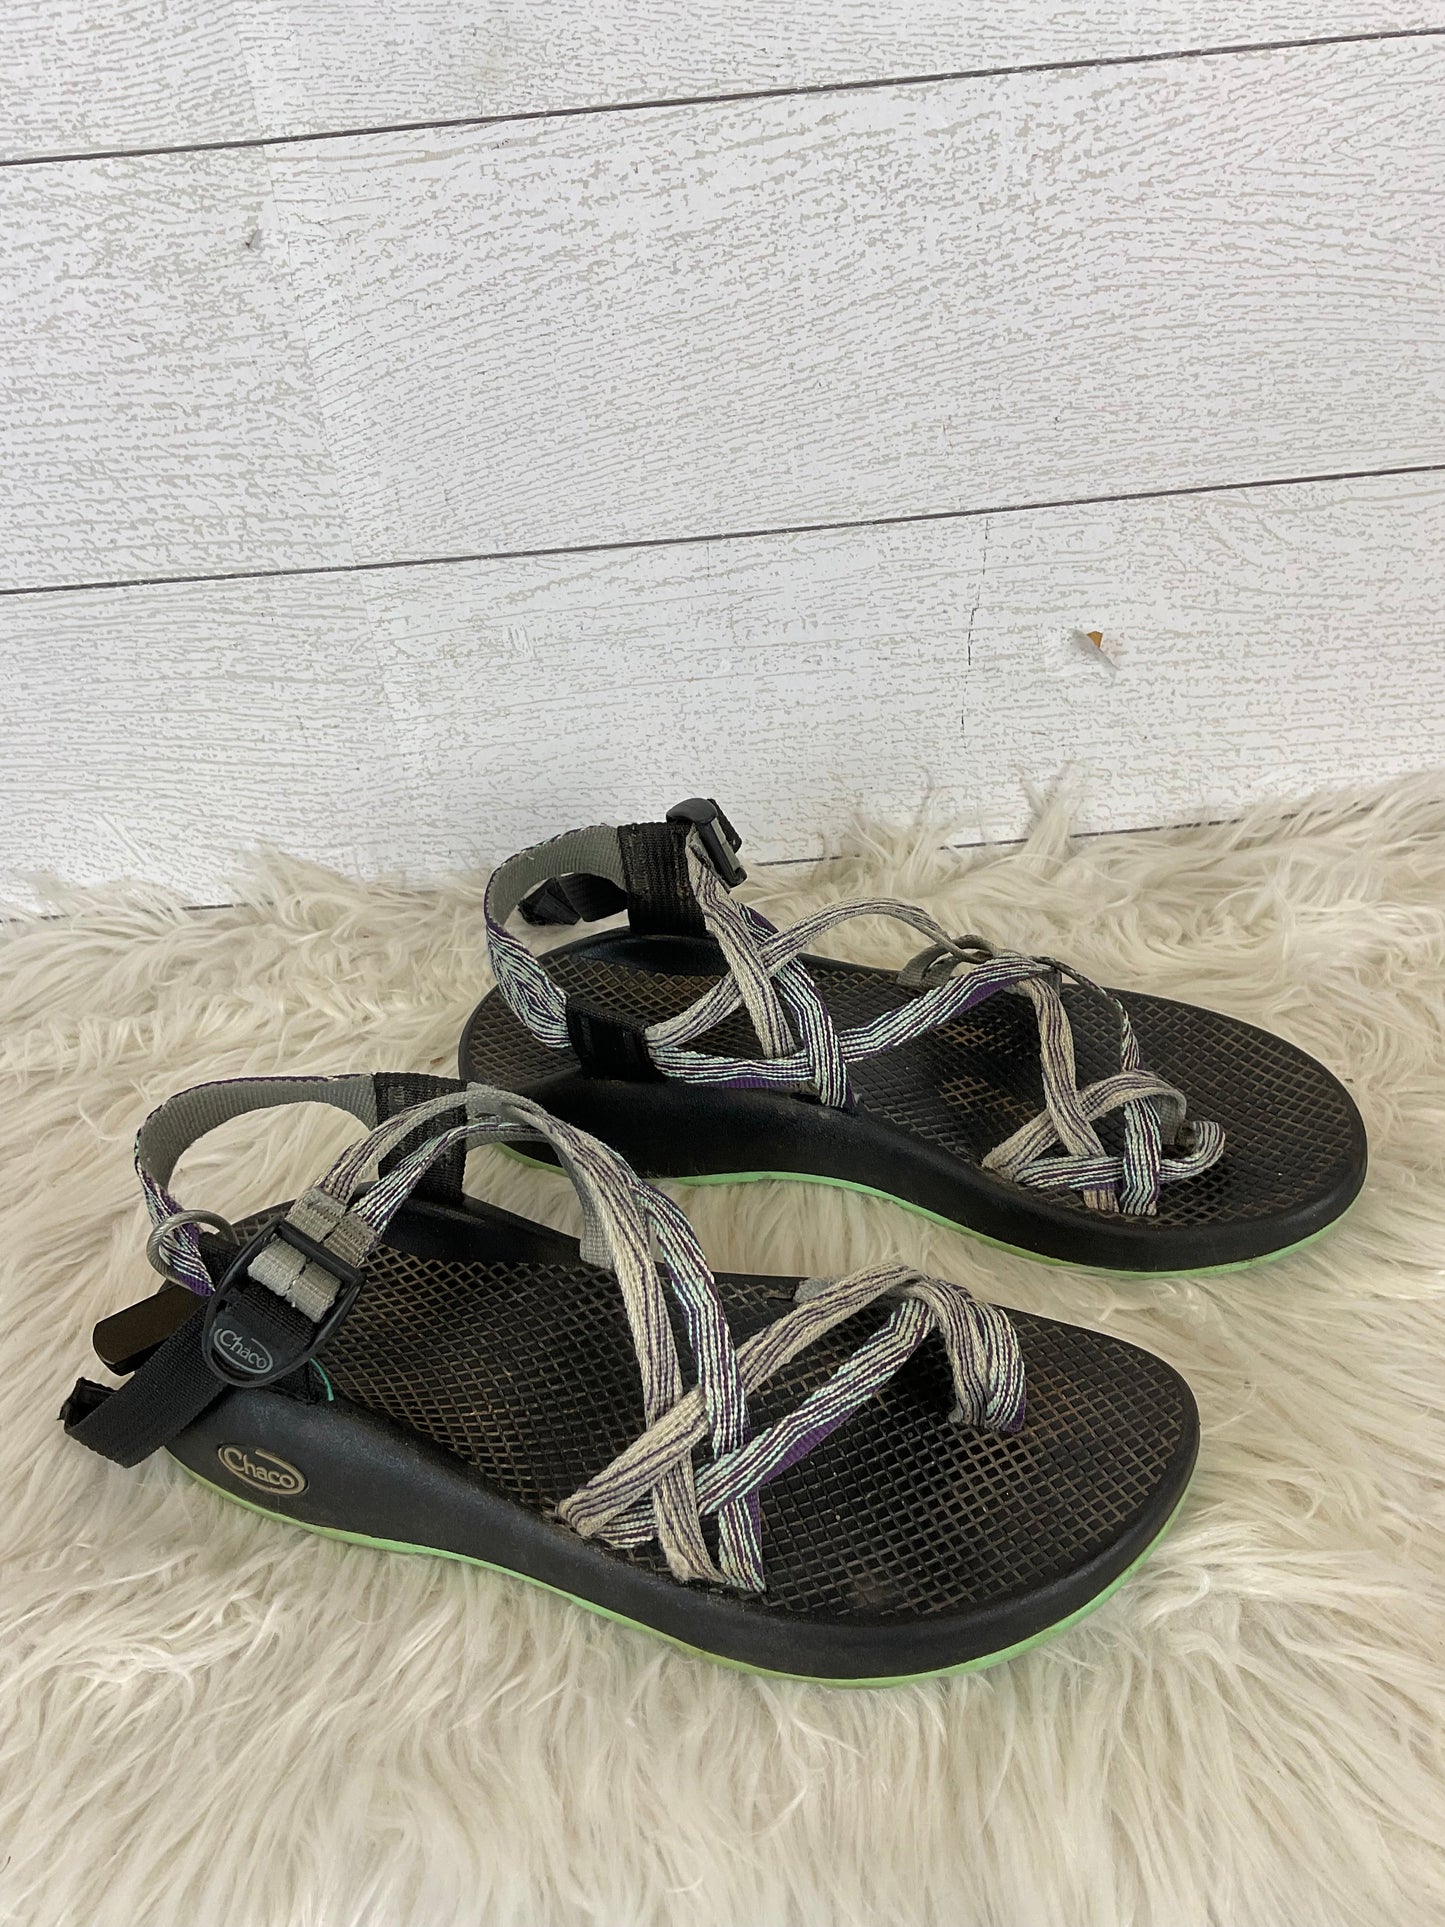 Sandals Designer By Chacos  Size: 10